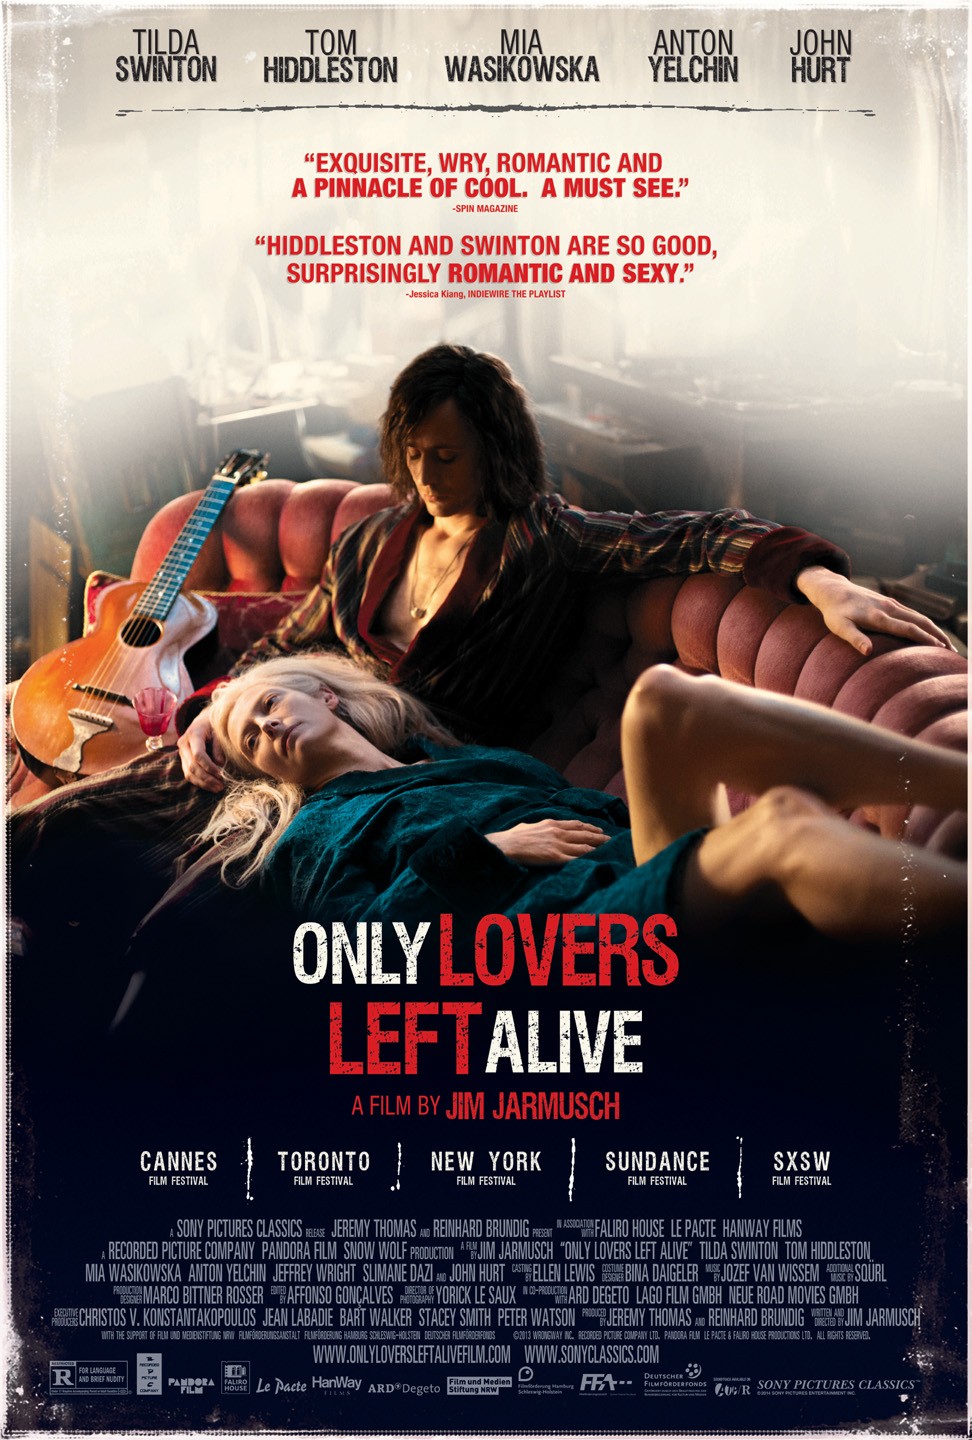 Extra Large Movie Poster Image for Only Lovers Left Alive (#7 of 7)